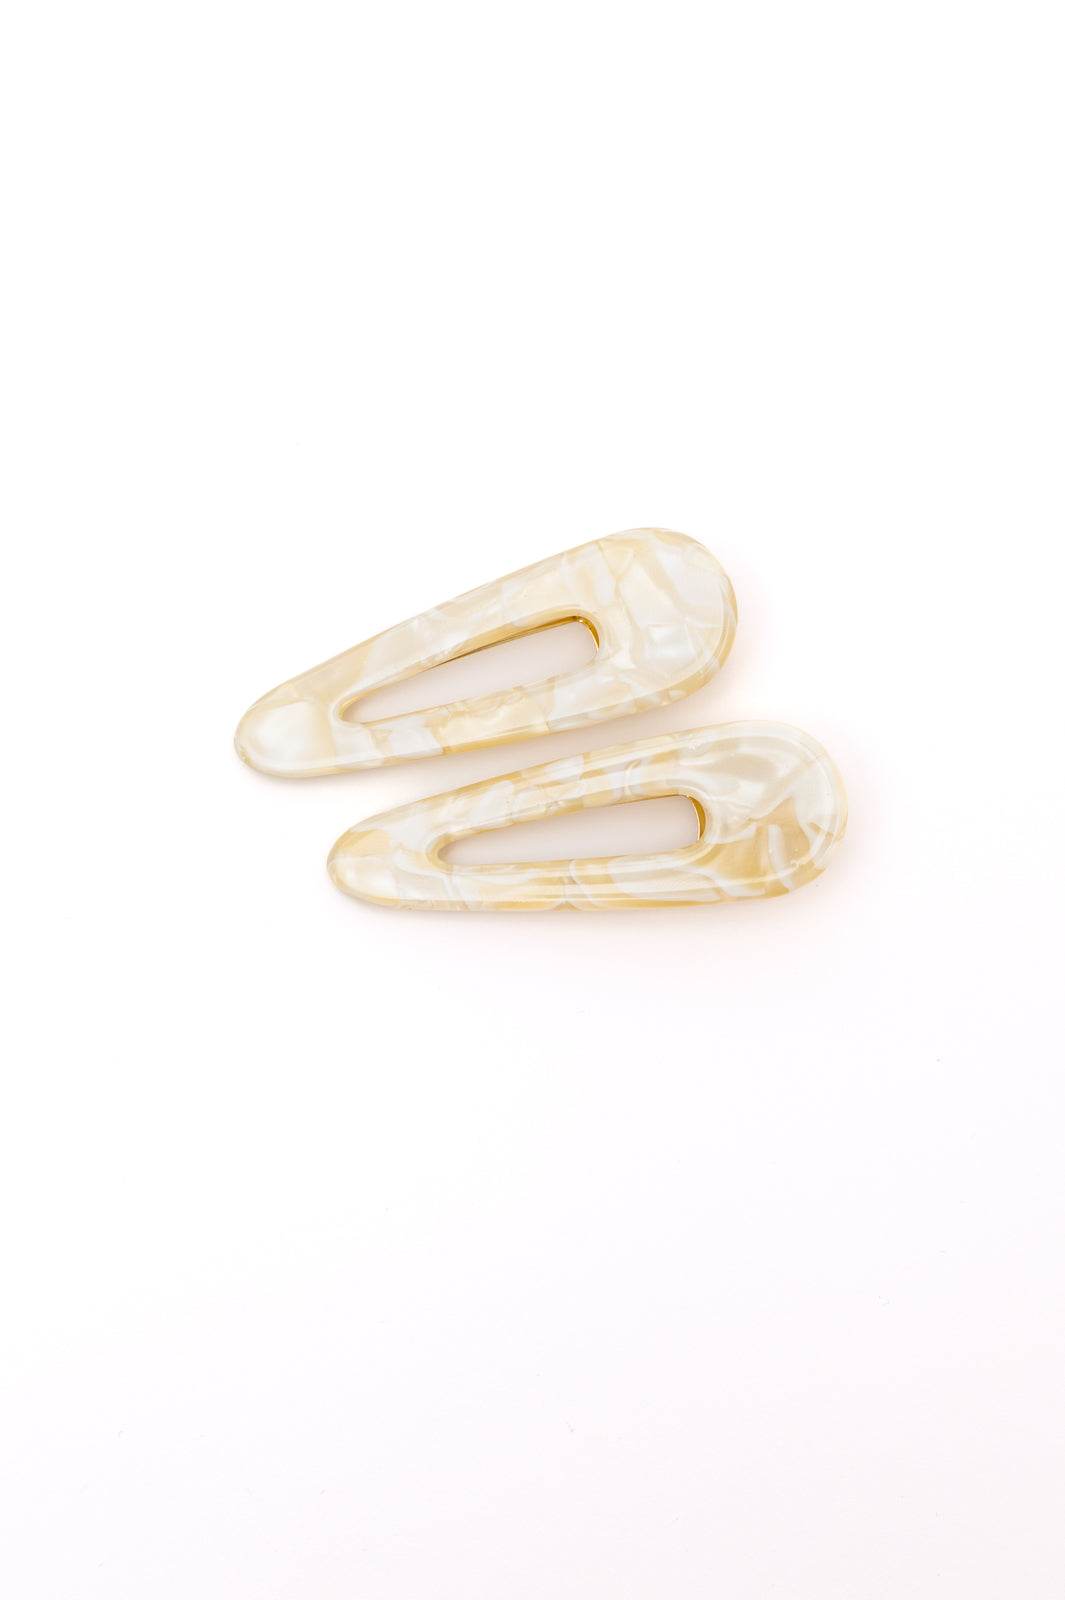 Teardrop Hair Clip in Gold Shell (2 Pack)